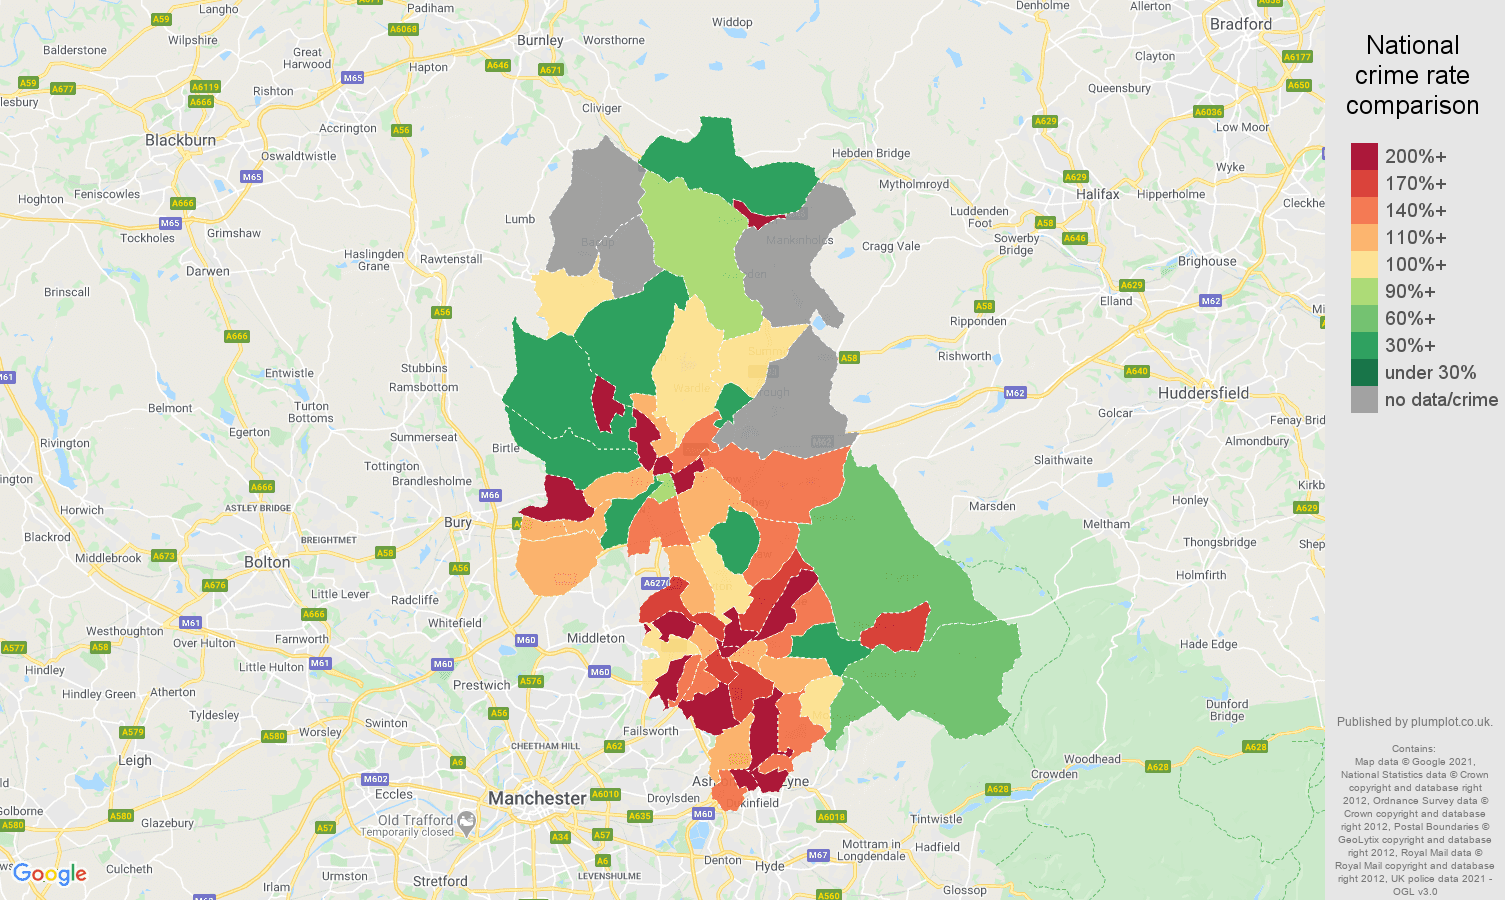 Oldham possession of weapons crime rate comparison map